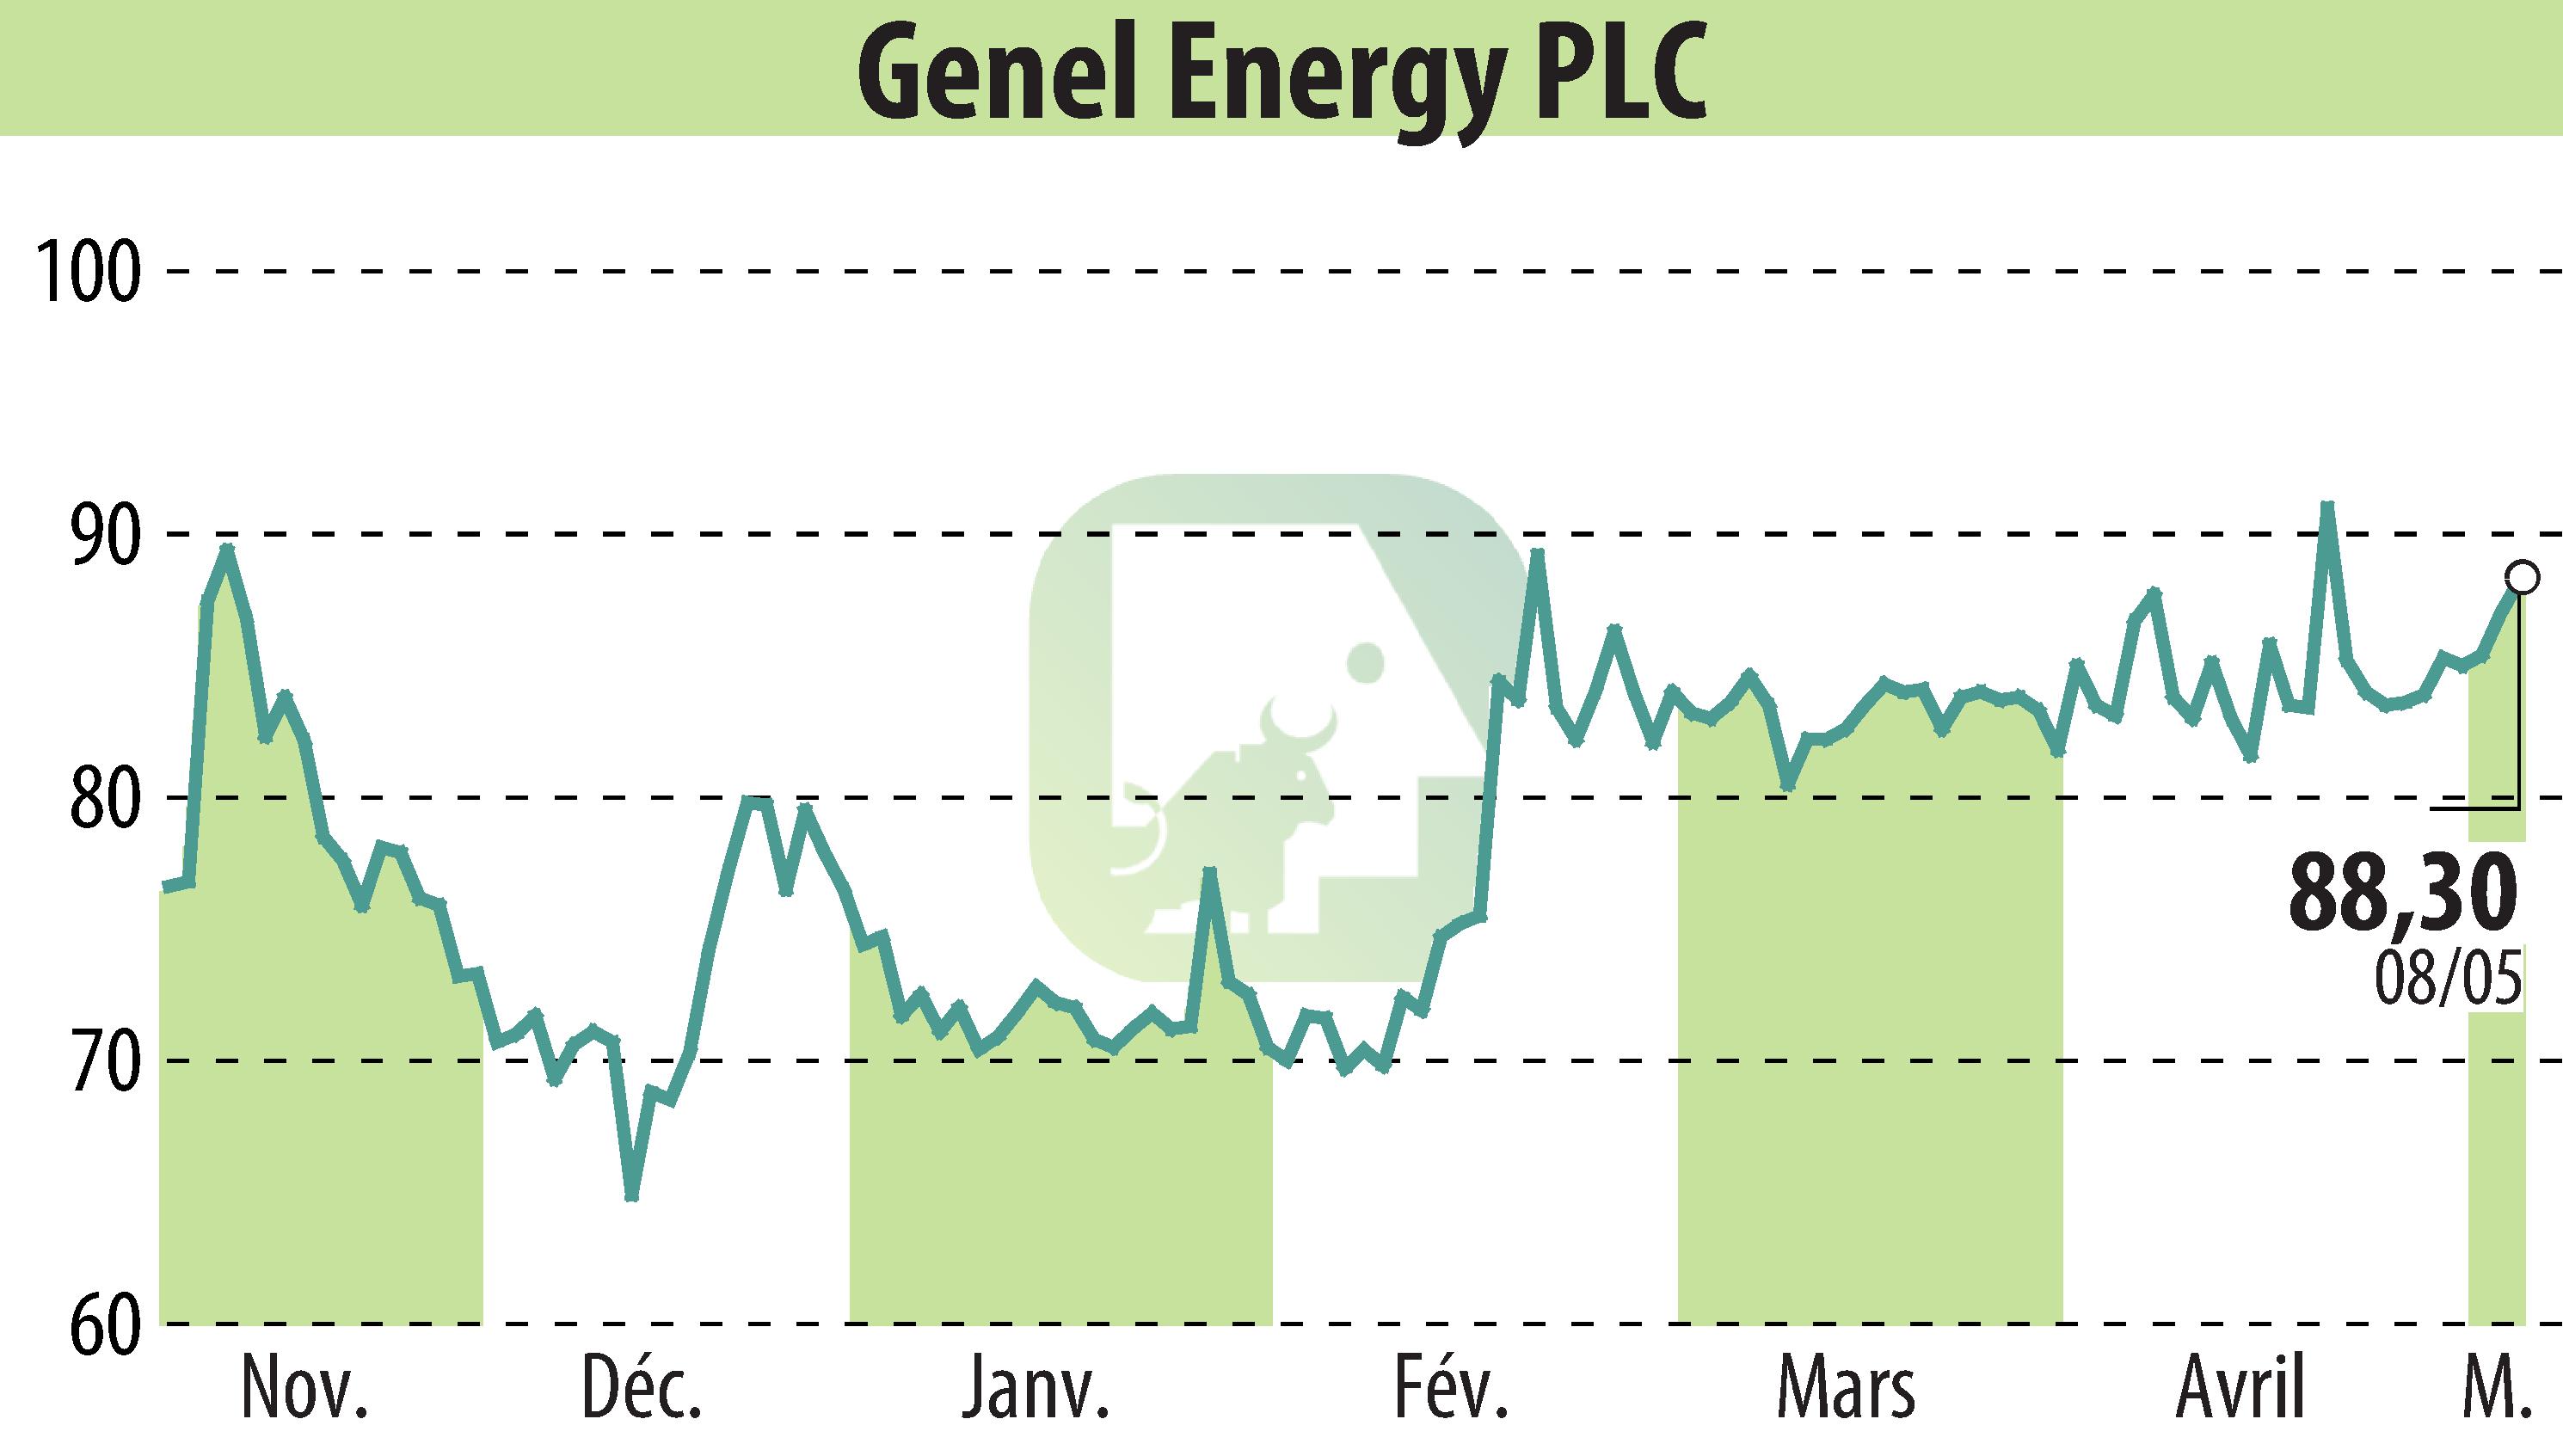 Stock price chart of Genel Energy (EBR:GENL) showing fluctuations.